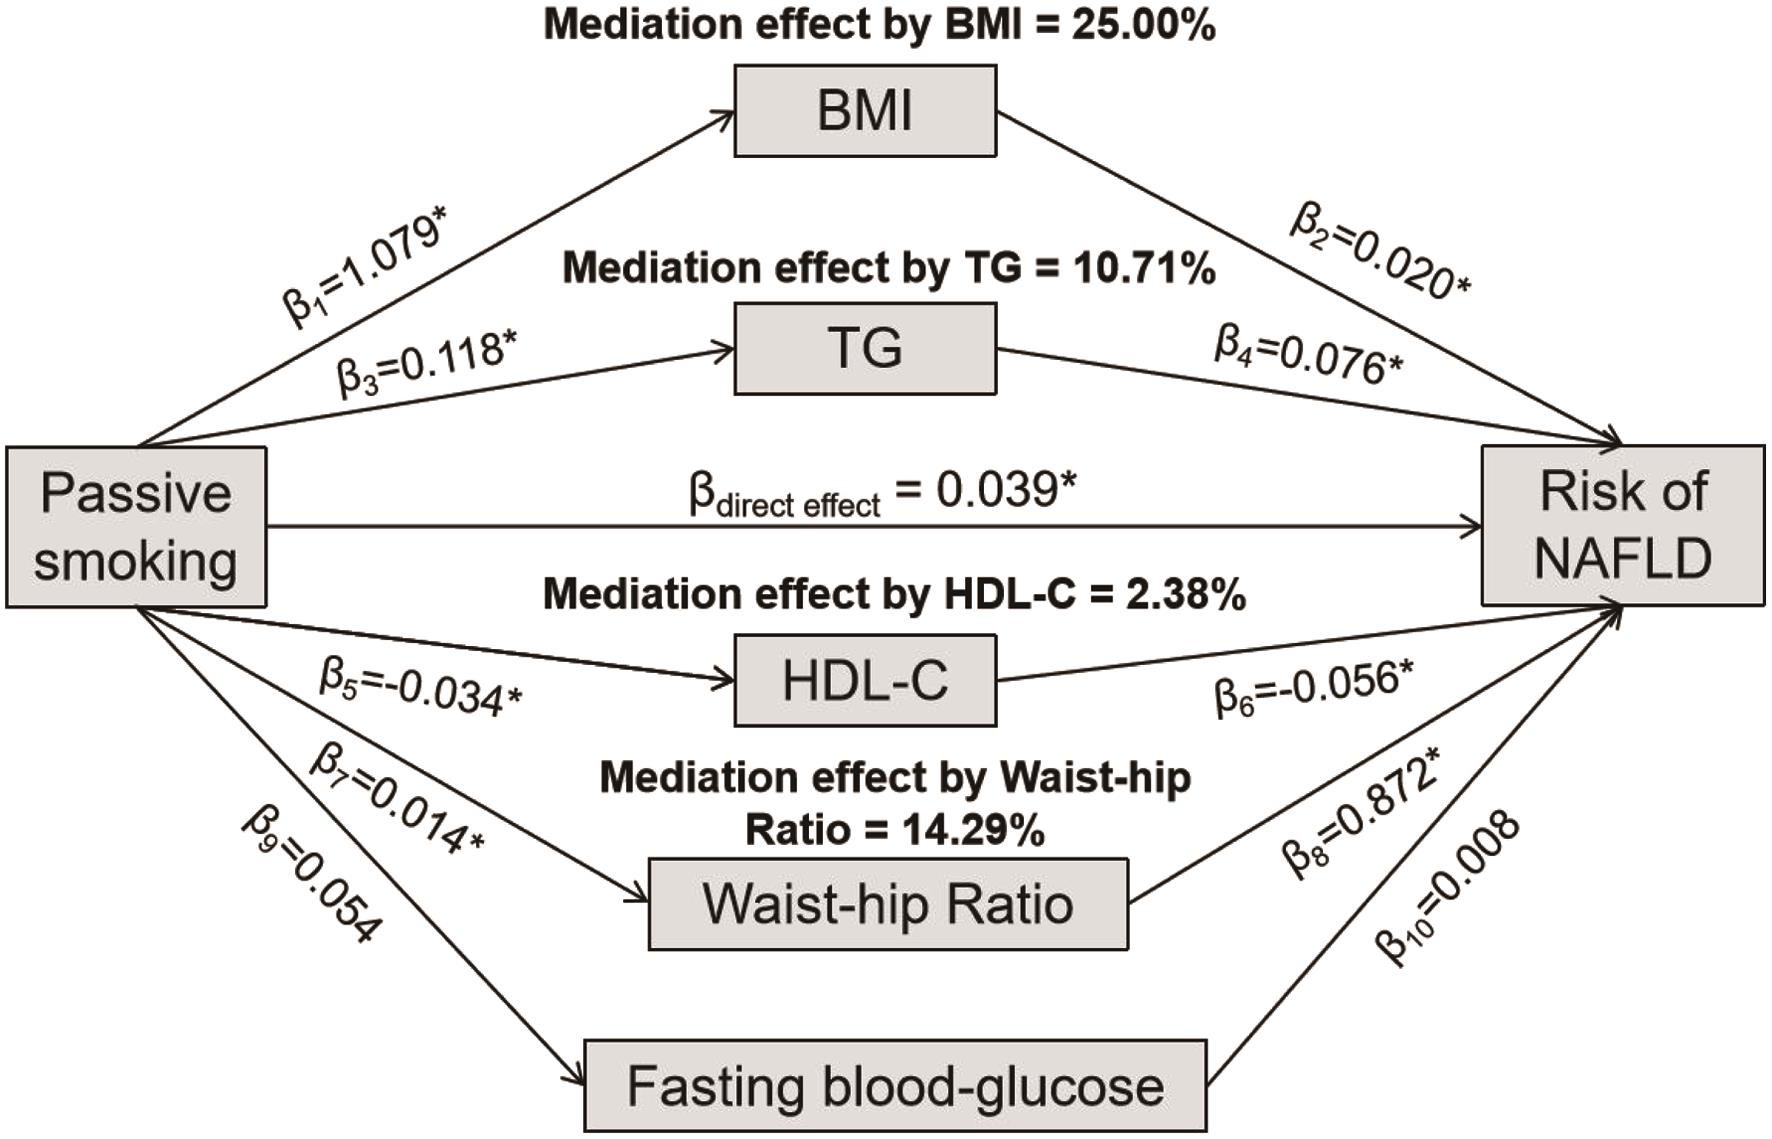 Mediation effects of BMI, TG, HDL-C, FBG and WHR on the association between female passive smoking and risk of nonalcoholic fatty liver disease in UK Biobank.